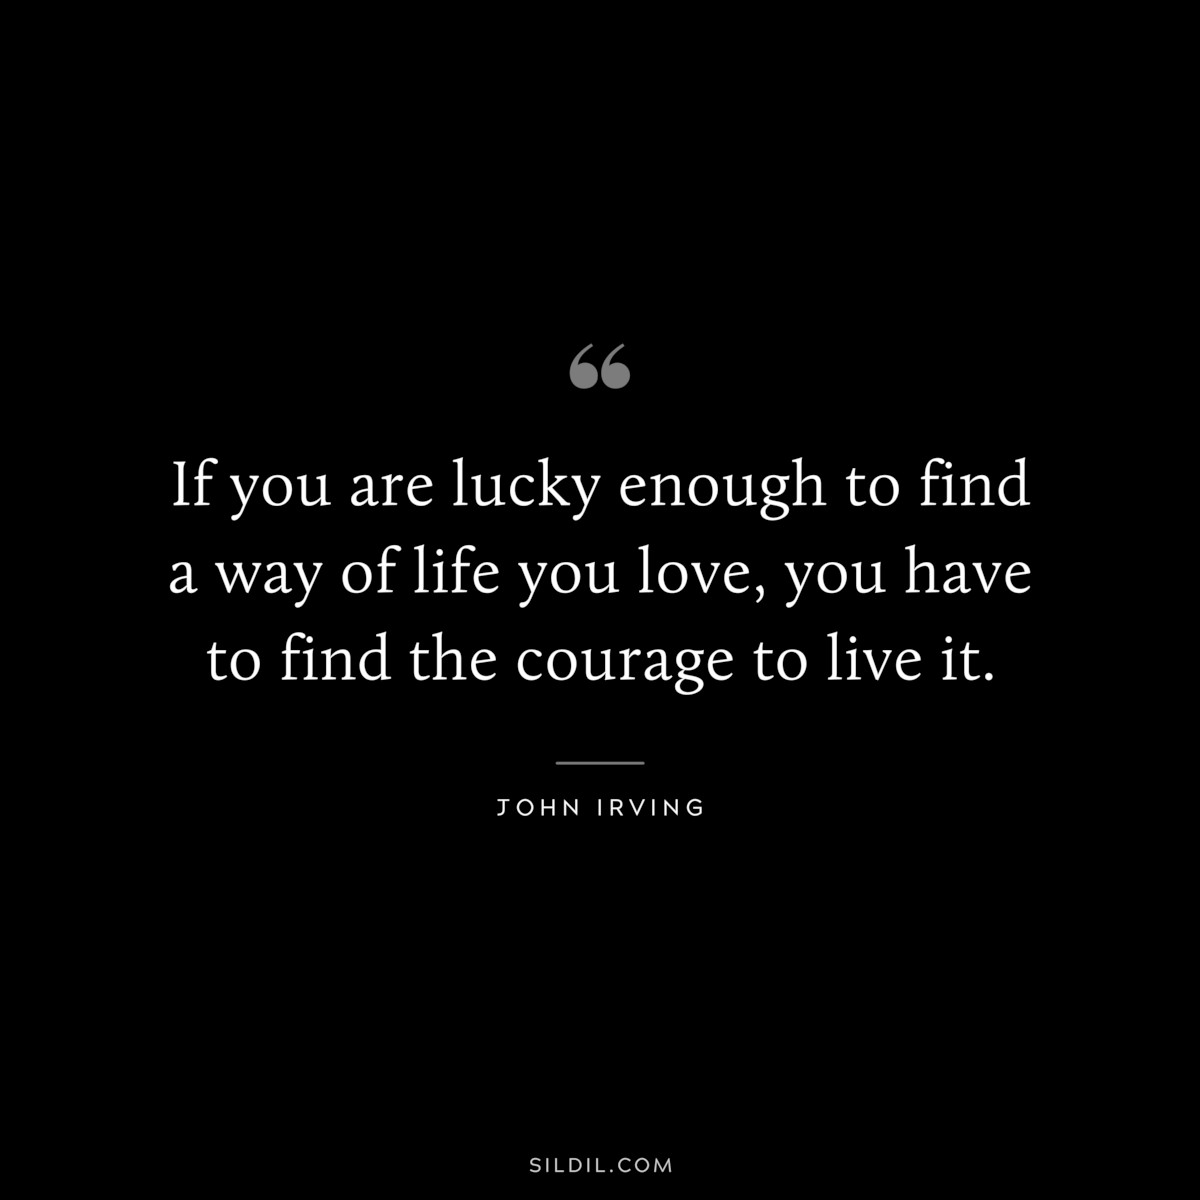 If you are lucky enough to find a way of life you love, you have to find the courage to live it. ― John Irving